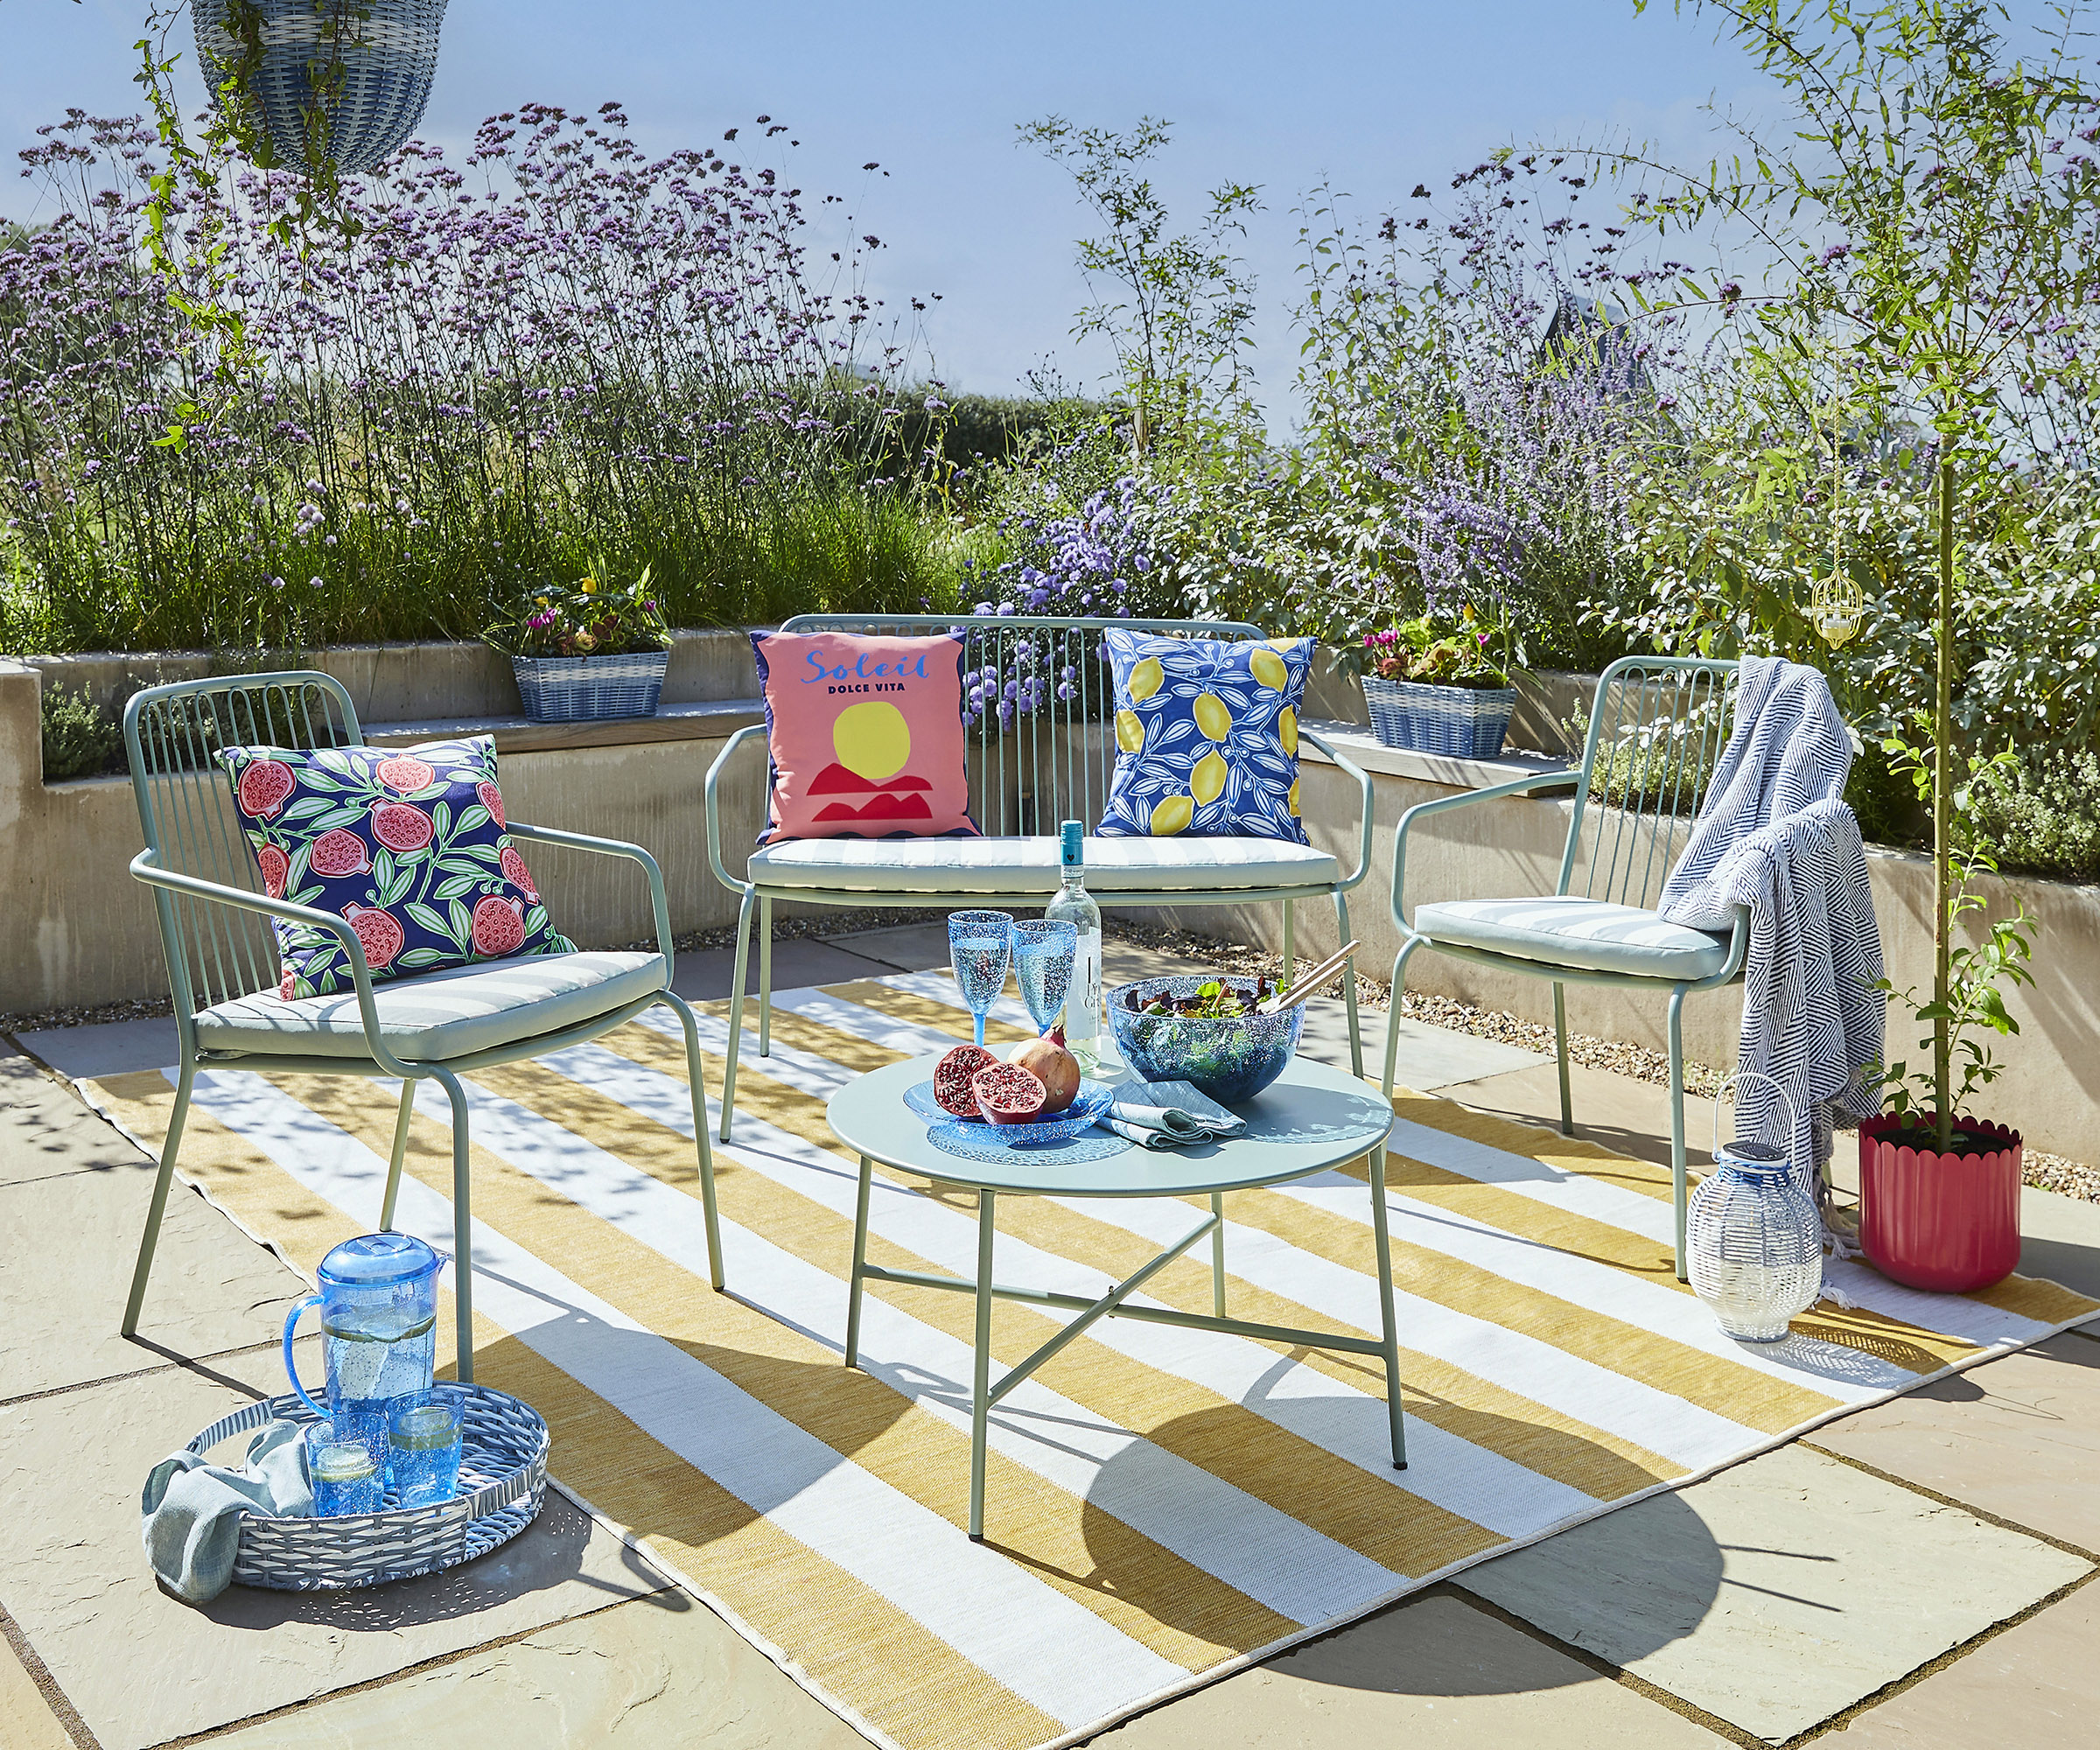 A sunny terrace with metal garden furniture with quirky outdoor cushion and throws in pastel shades